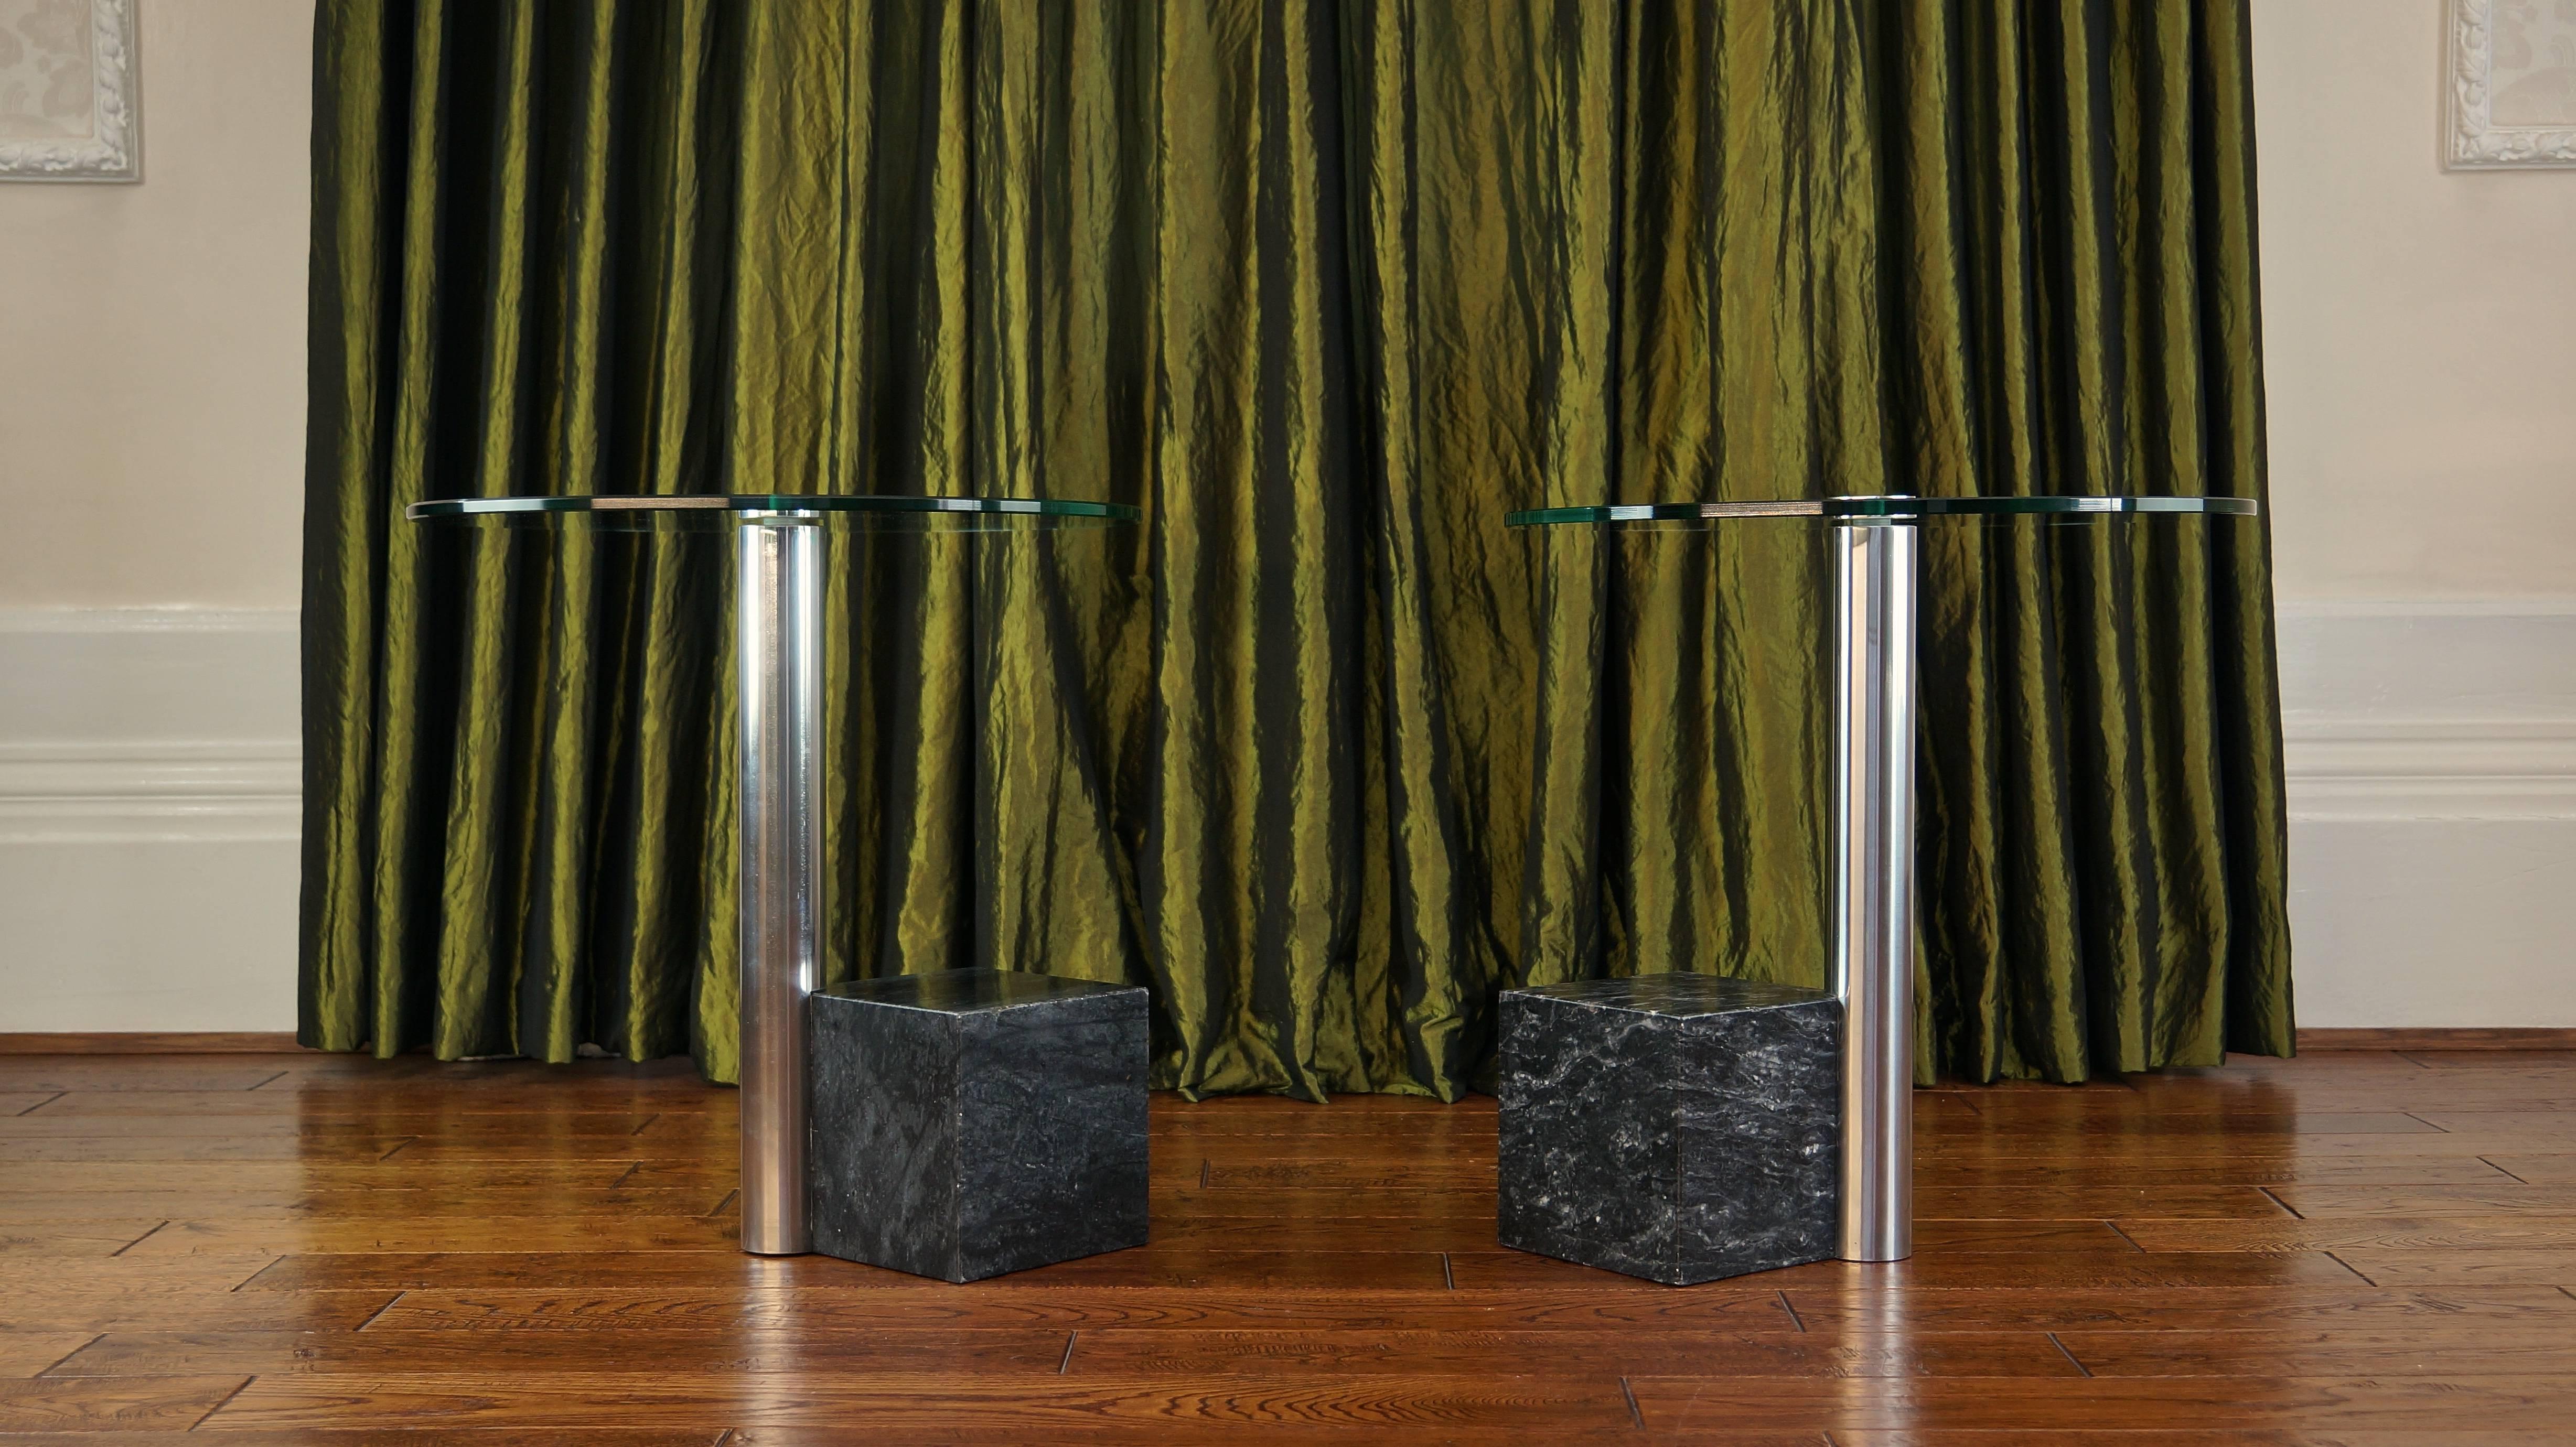 Dutch Pair of Vintage Marble and Glass HK2 Side Tables by Hank Kwint, Metaform 1980s For Sale